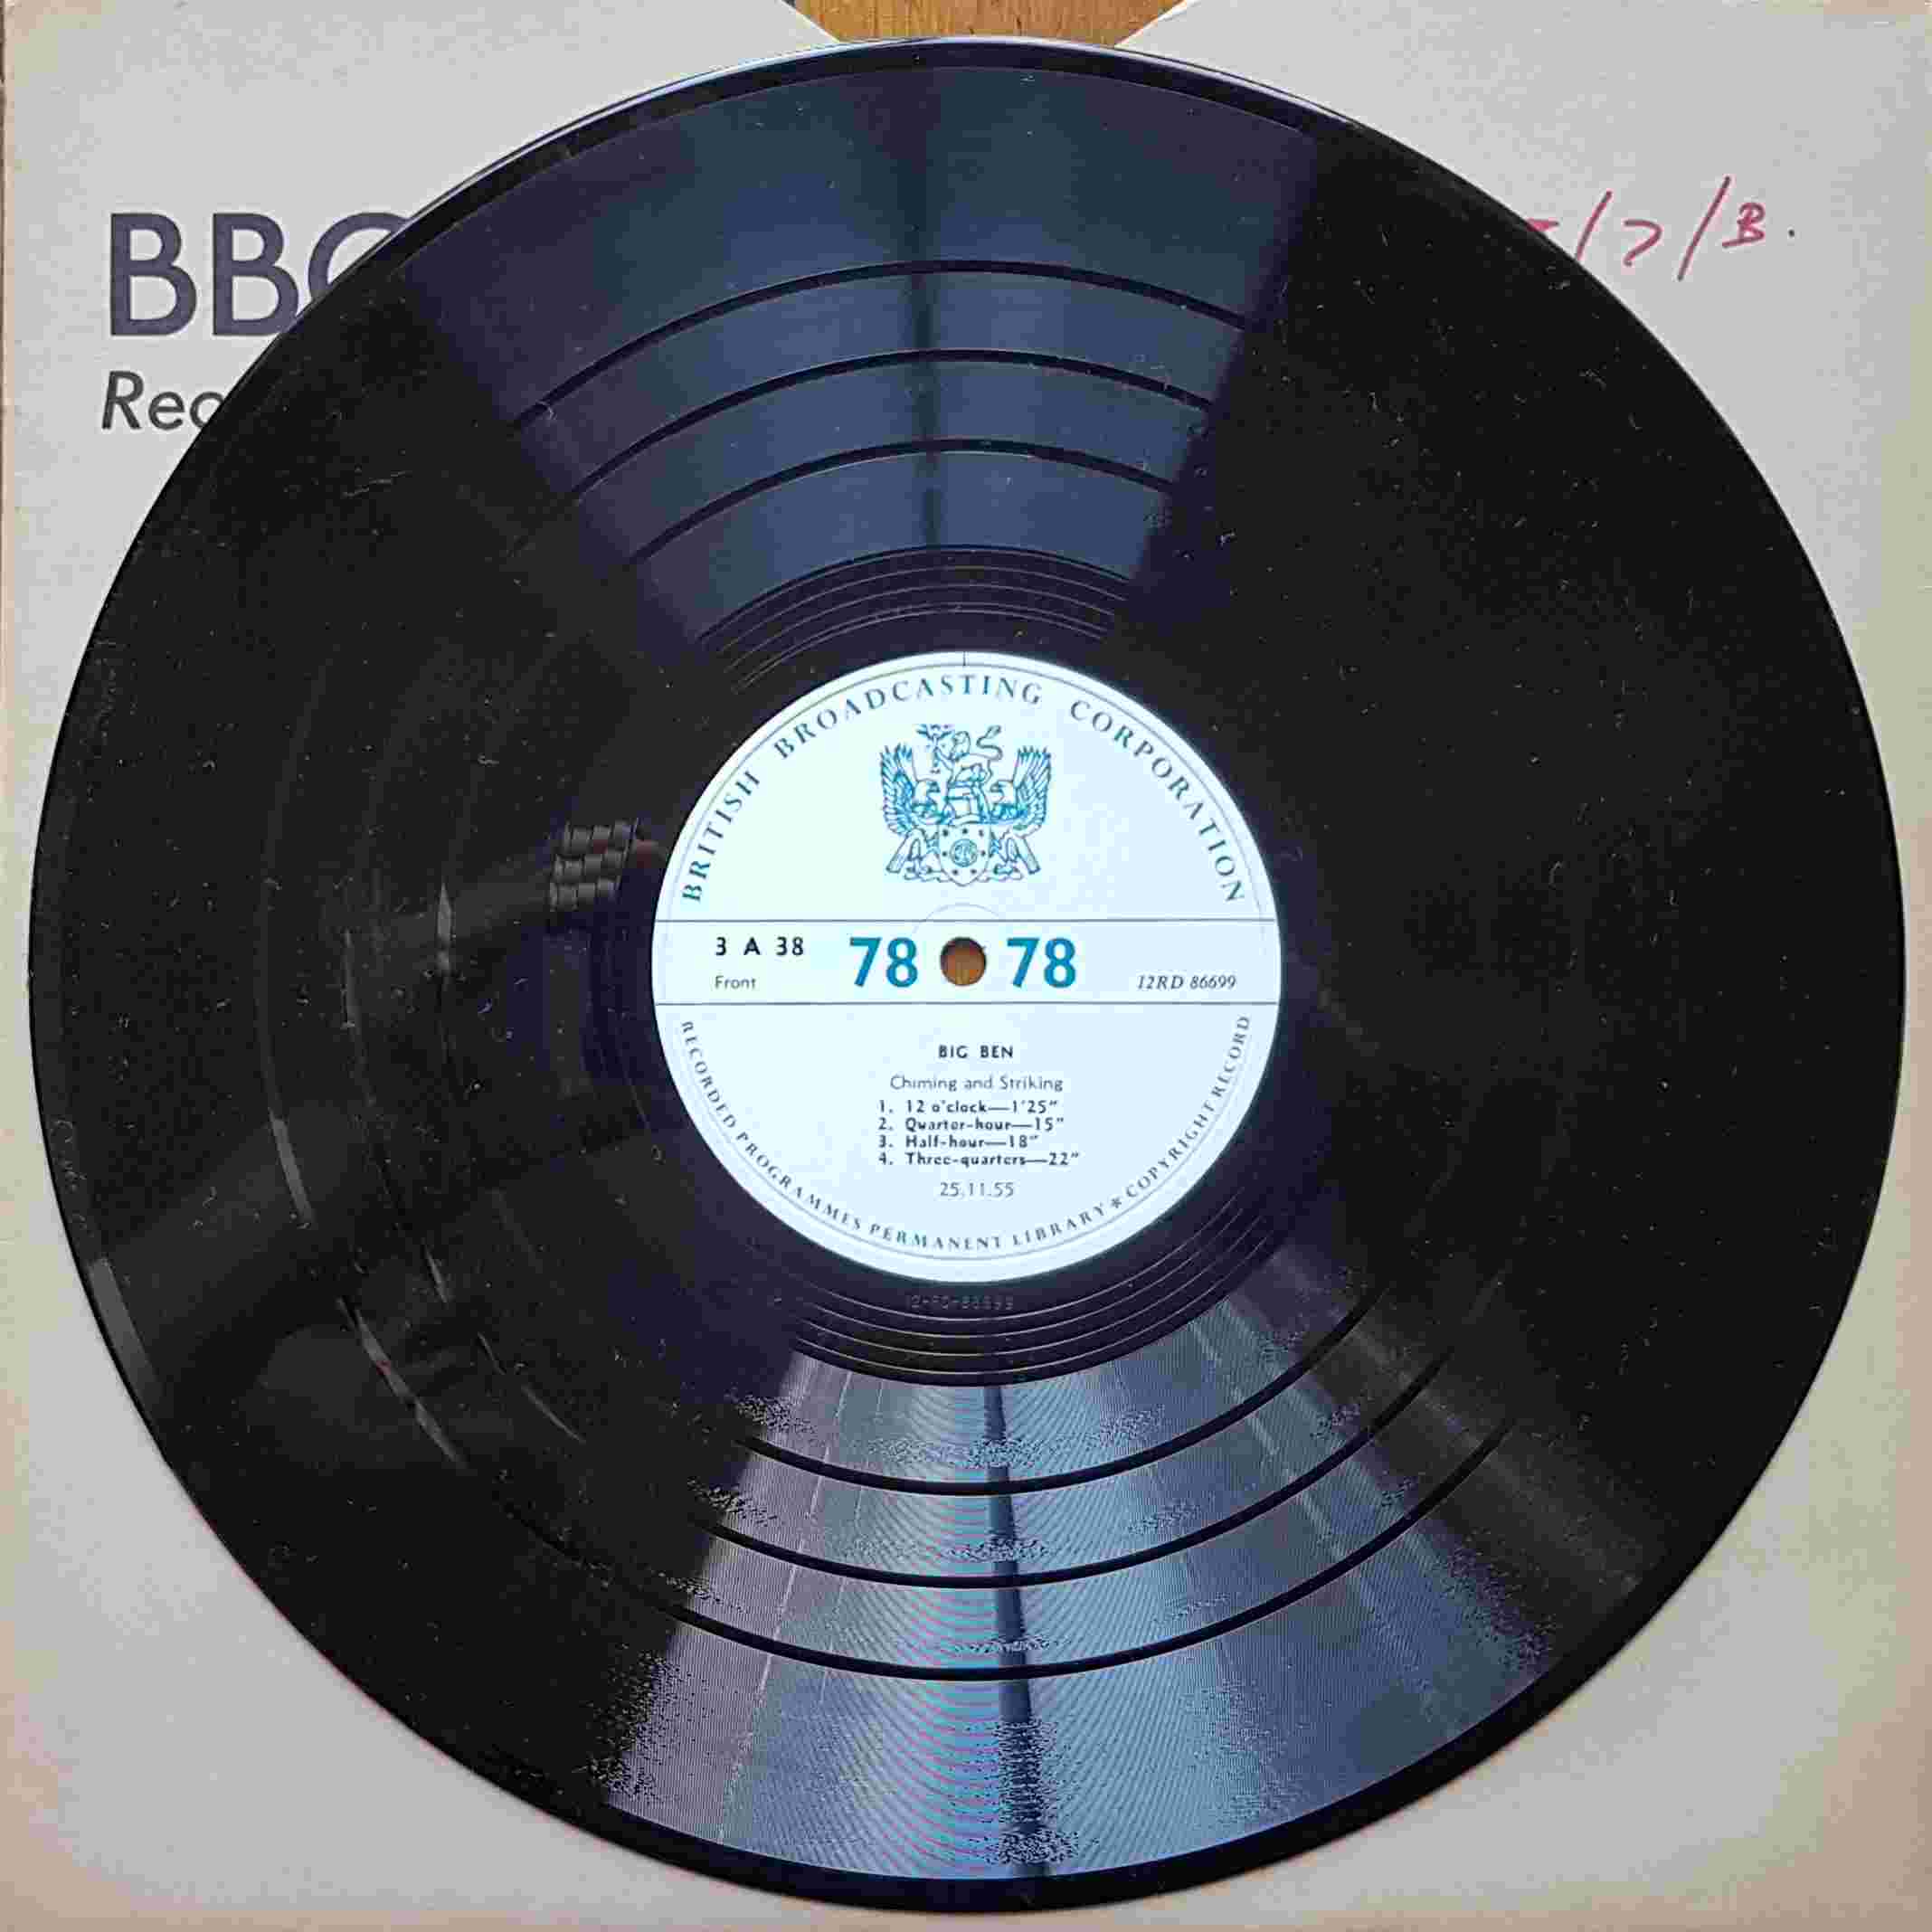 Picture of 3 A 38 Big Ben by artist Not registered from the BBC 78 - Records and Tapes library